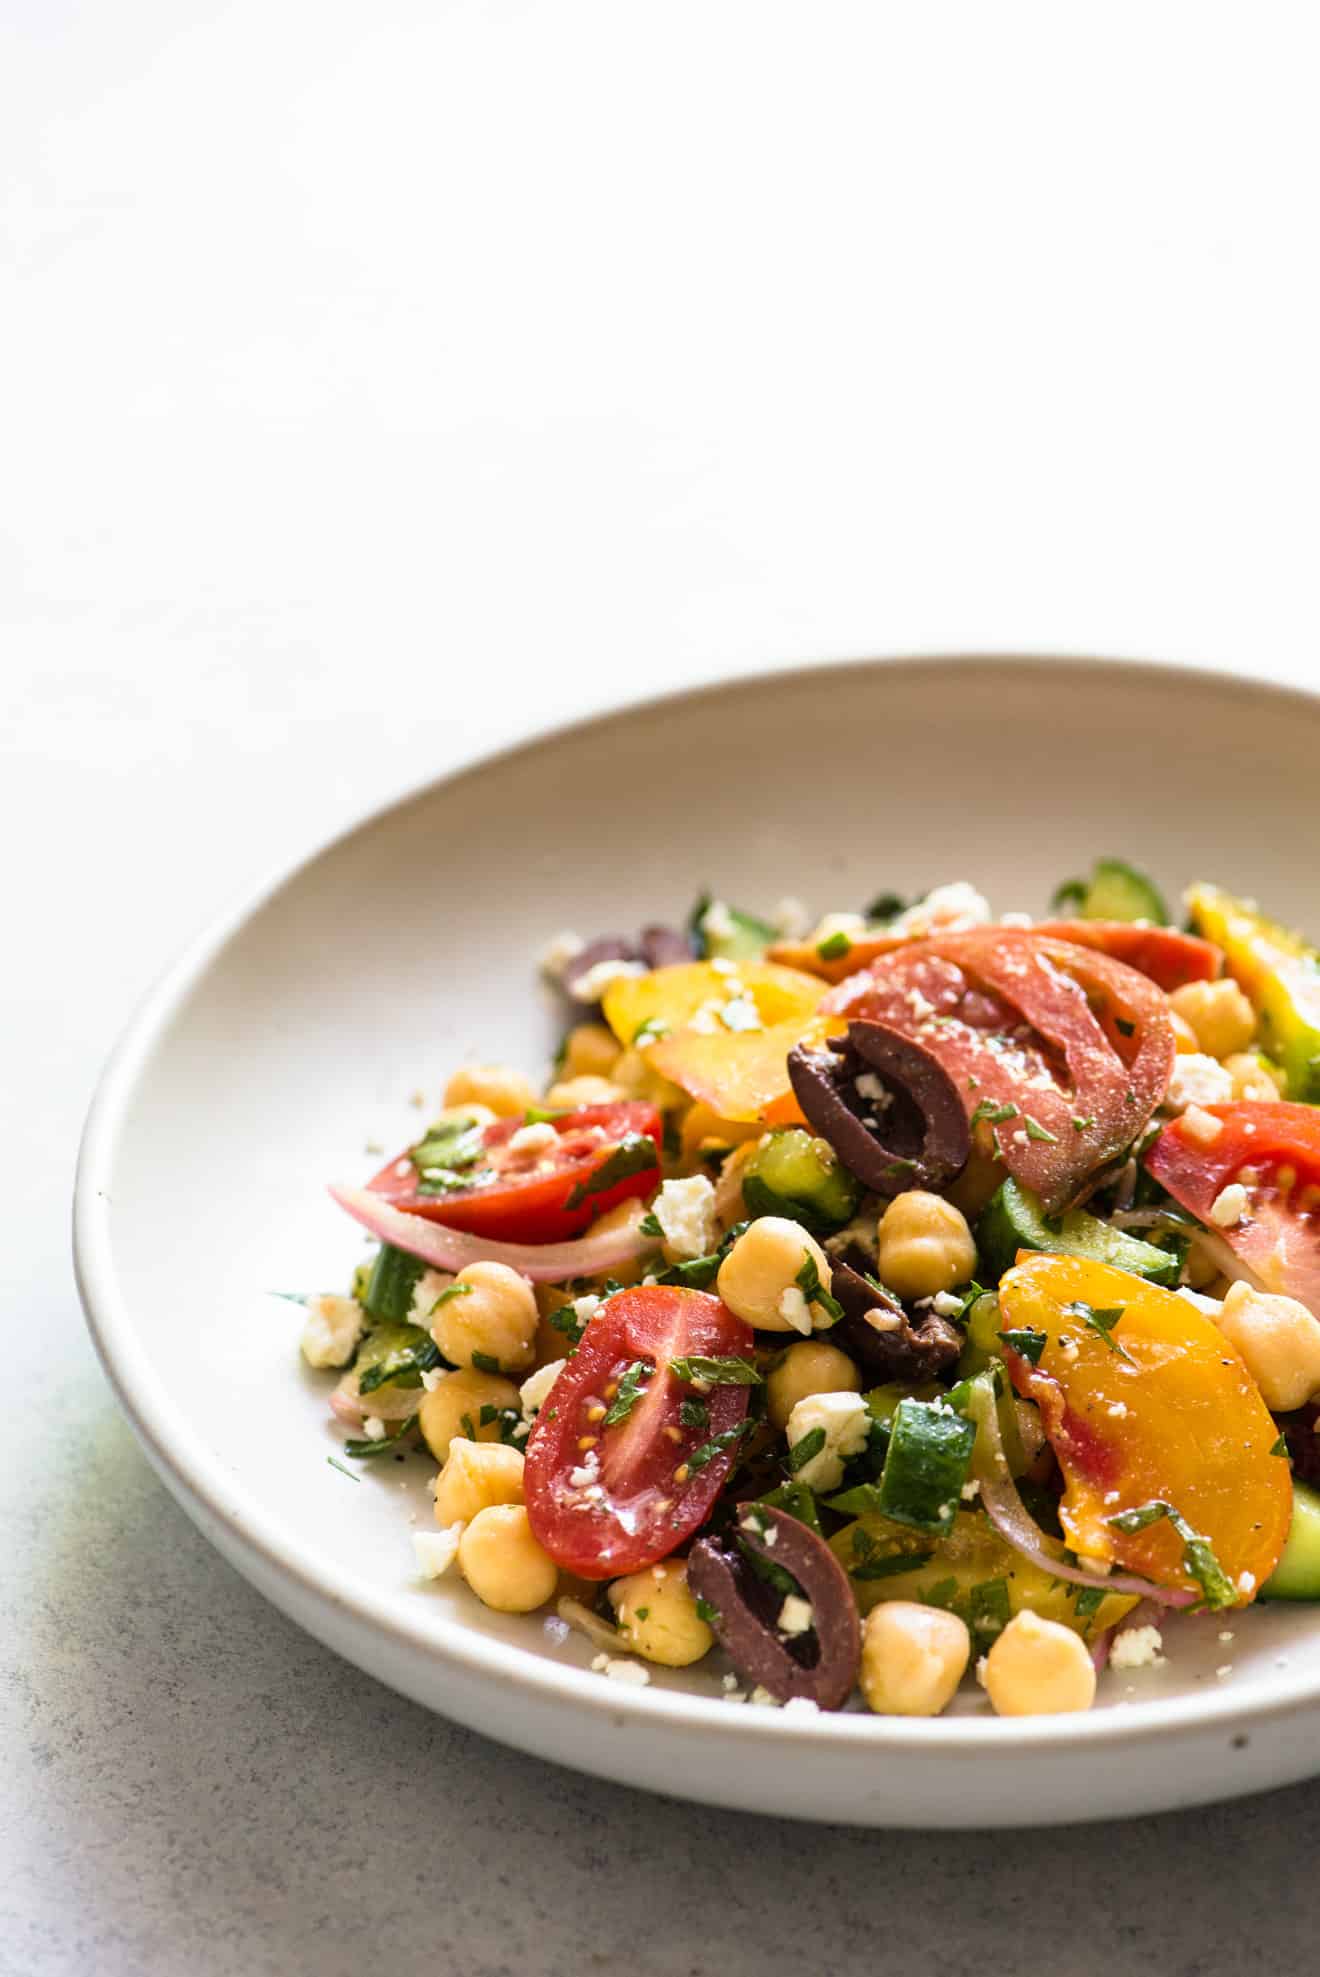 Greek Salad with Chickpeas - a healthy salad that is great as a side or main dish!